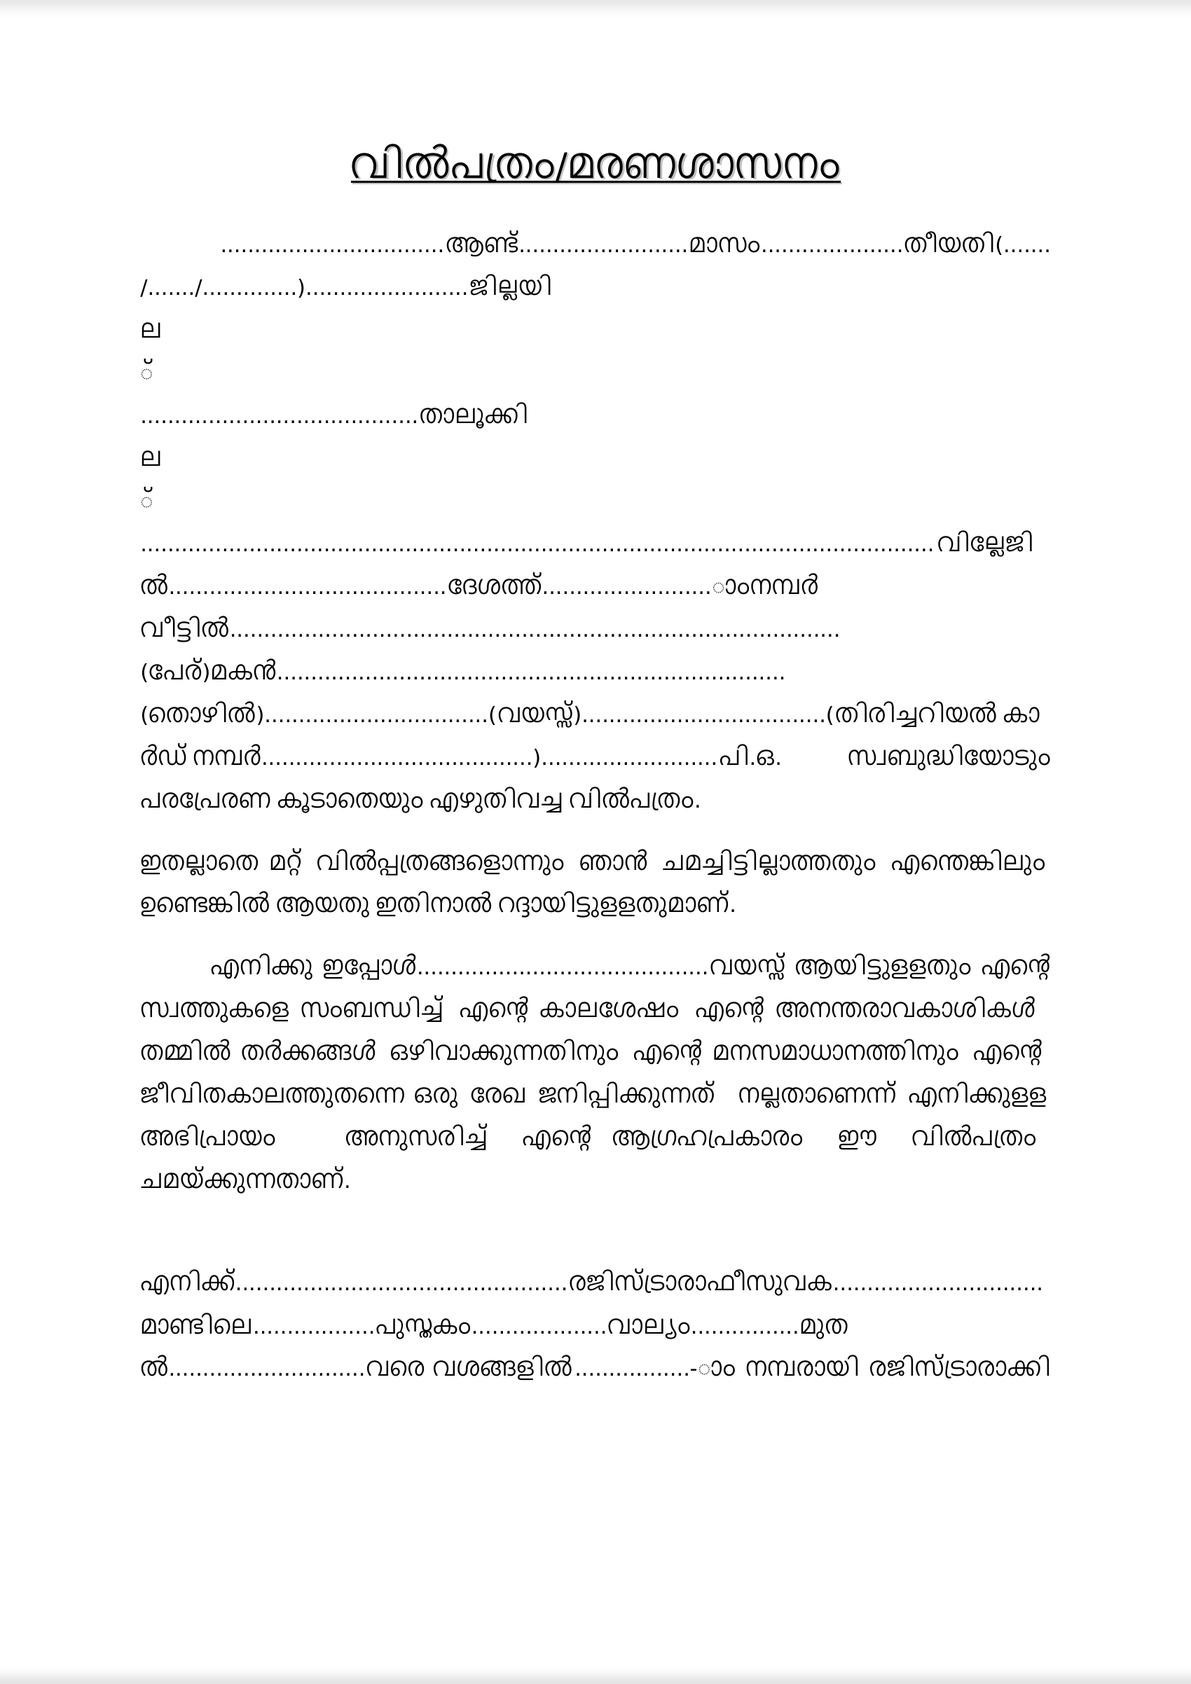 deed of assignment meaning in malayalam